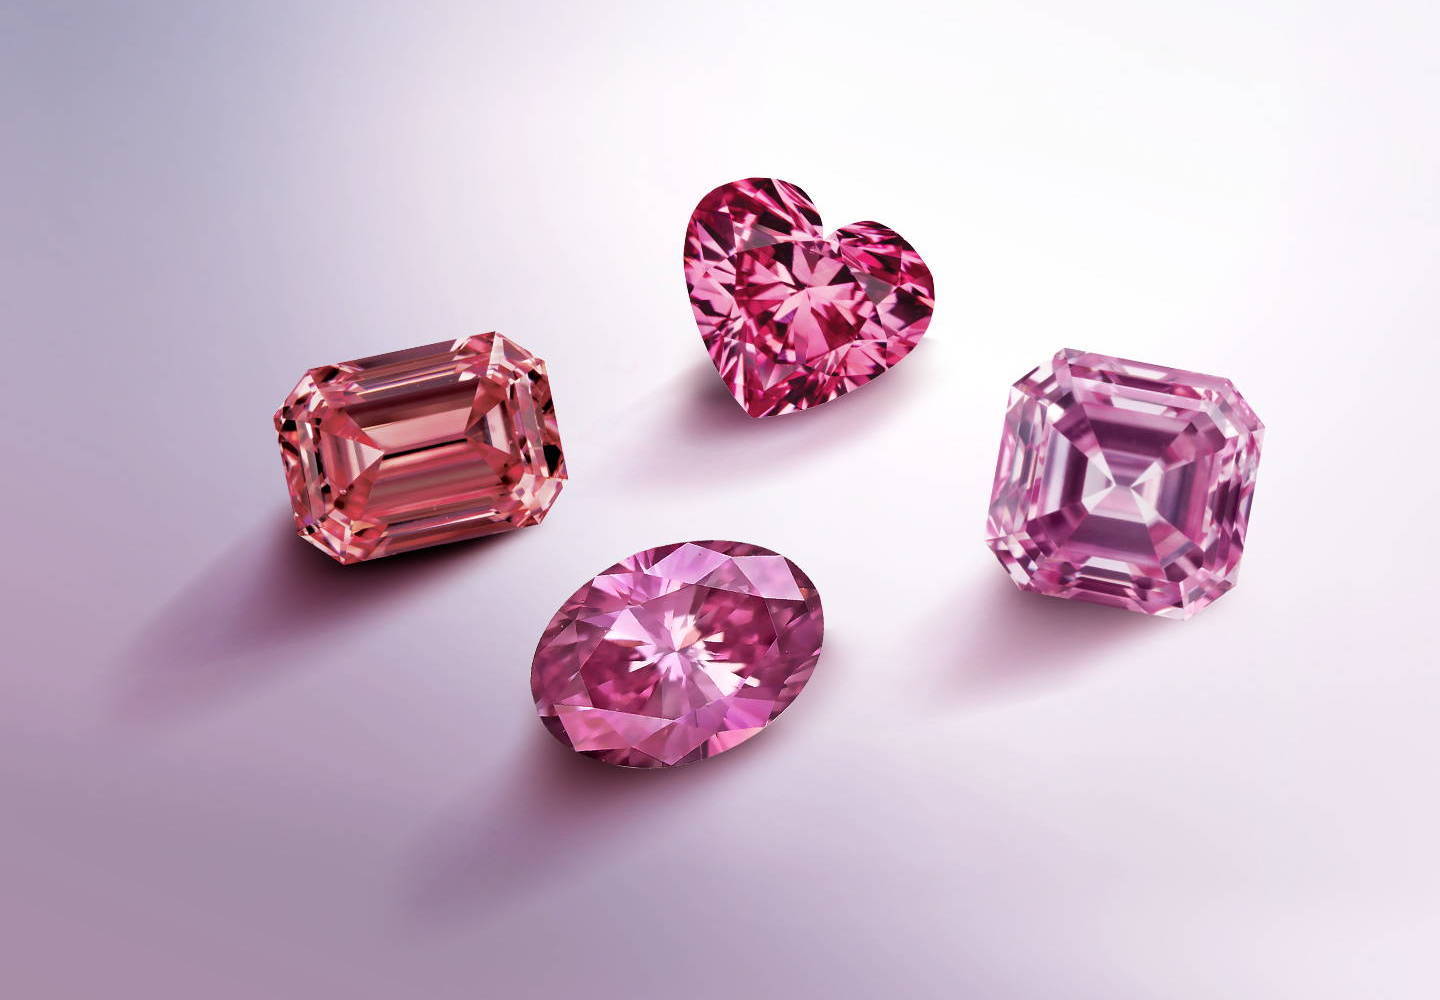 What's behind our obsession with gems?